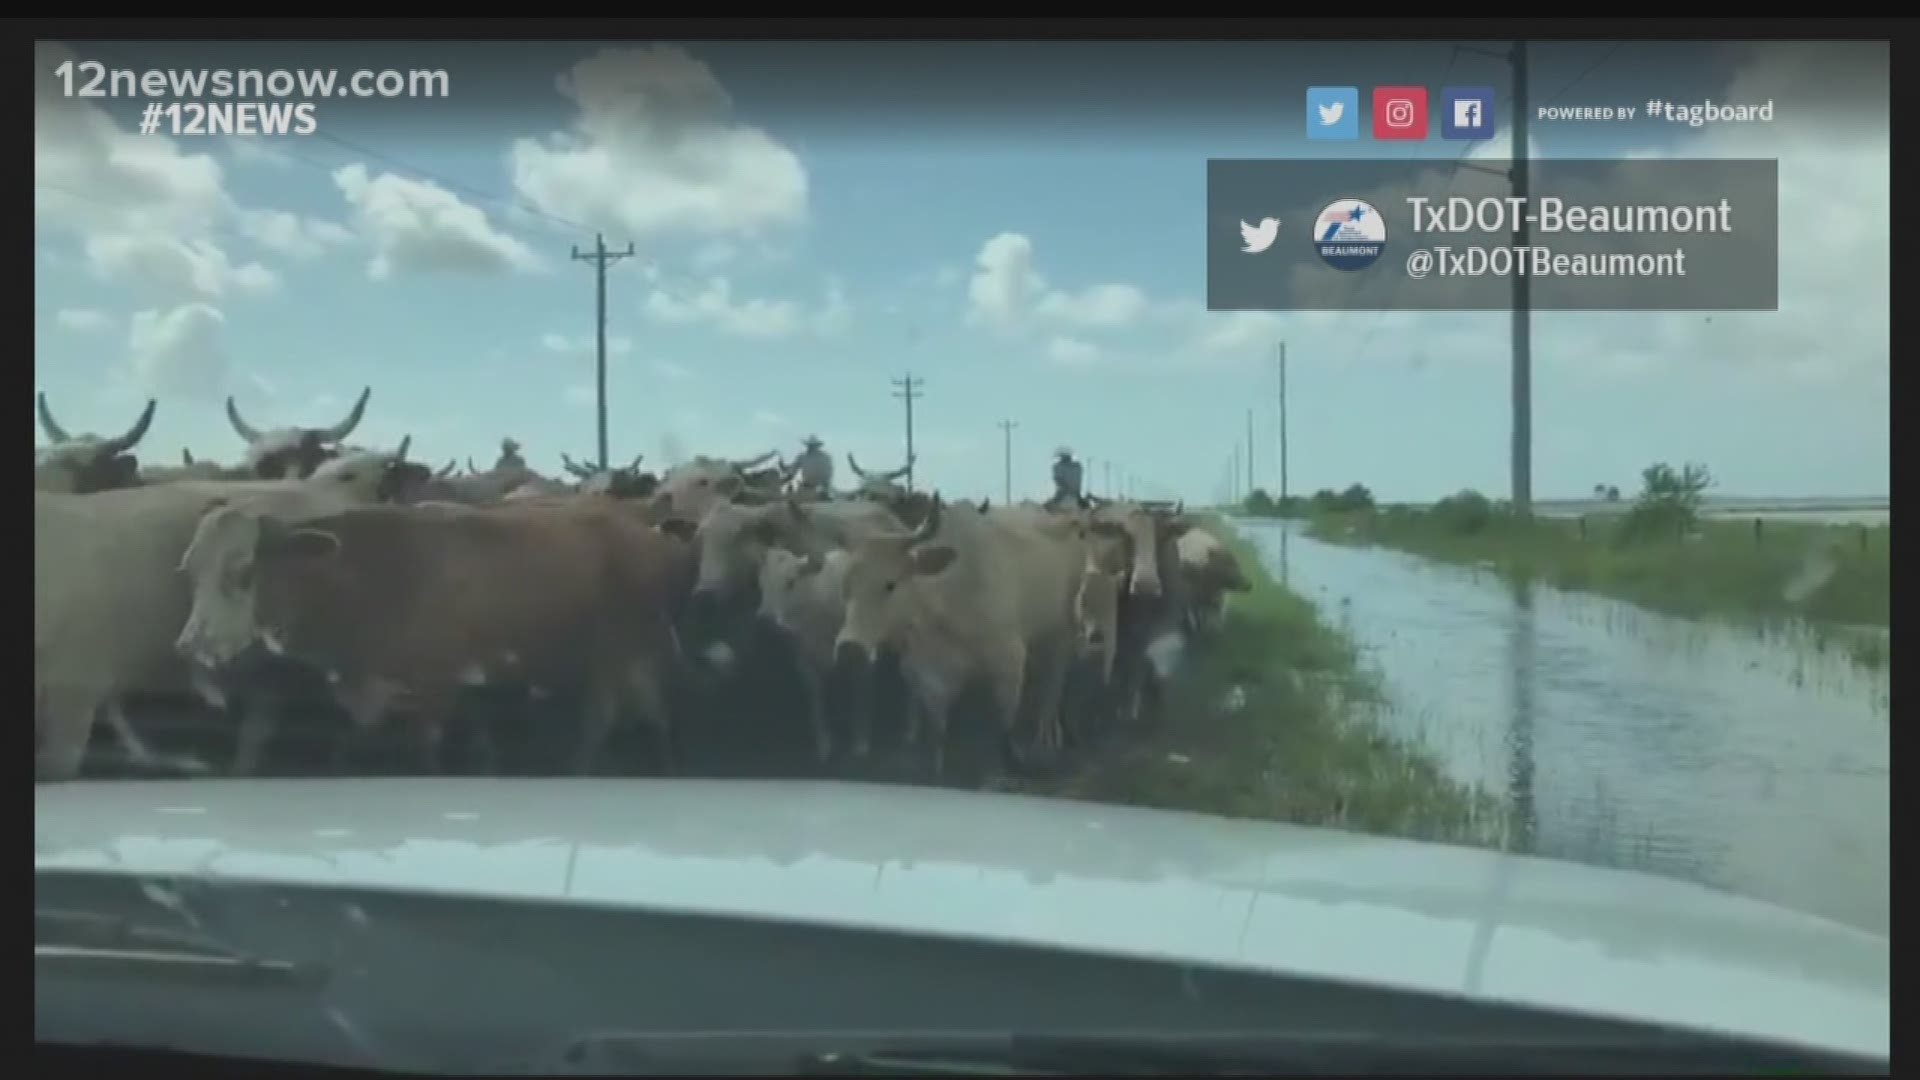 Ranchers in Southeast Texas are doing their best to get cattle out of flooded areas. Drivers in the area should use caution for any cattle drives crossing highways.